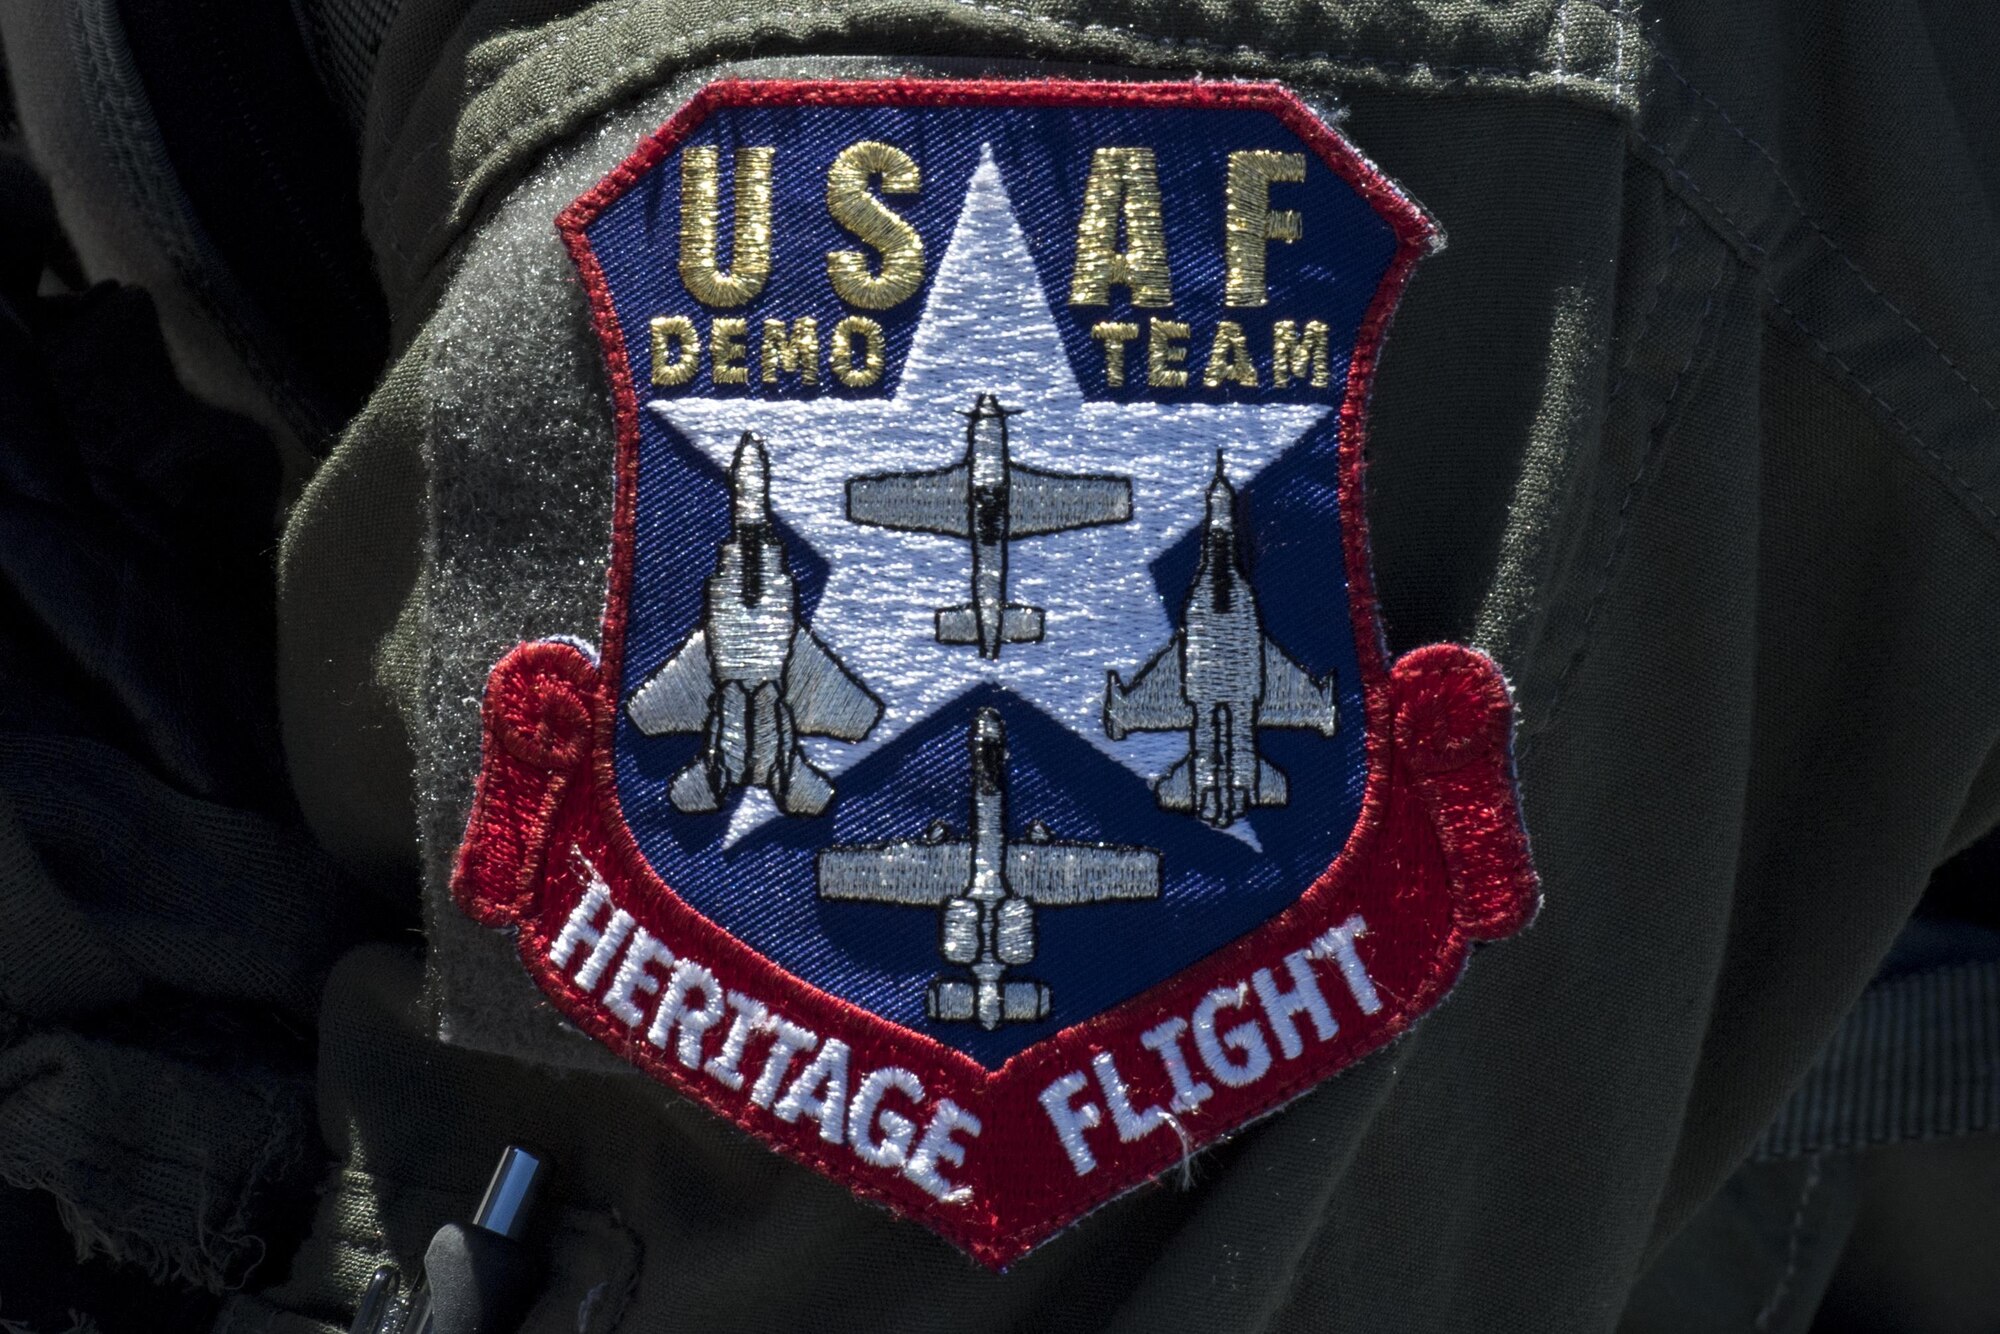 The United States Air Force Heritage Flight patch rests on the shoulder of Maj. Joseph Morrin, A-10 Heritage Flight Team pilot, during the Naval Air Station Jacksonville Air Show, Nov. 2, 2017, at NAS Jacksonville, Fla. The U.S. Air Force Heritage Flight program showcases past, present and future aircraft to spectators at air shows around the world. (U.S. Air Force photo by Staff Sgt. Eric Summers Jr.)